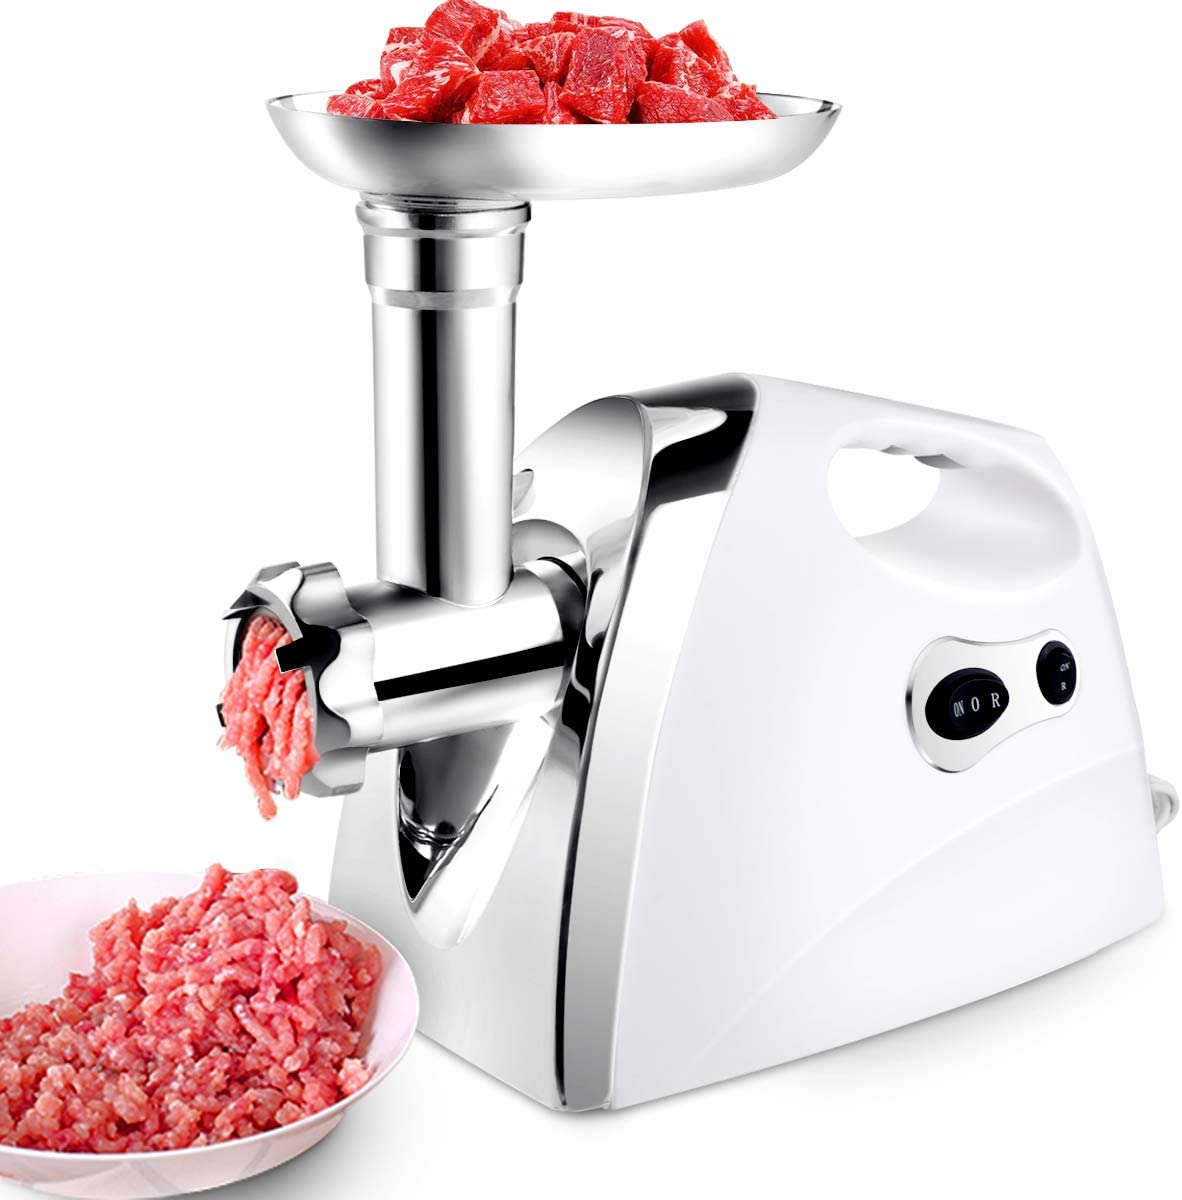 COSTWAY Electric Meat Mincer, Sausage Machine with Sausage Filling Attachment, 1200 W, Metal Mincing Mechanism, 3 Perforated Discs, Stainless Steel Blade